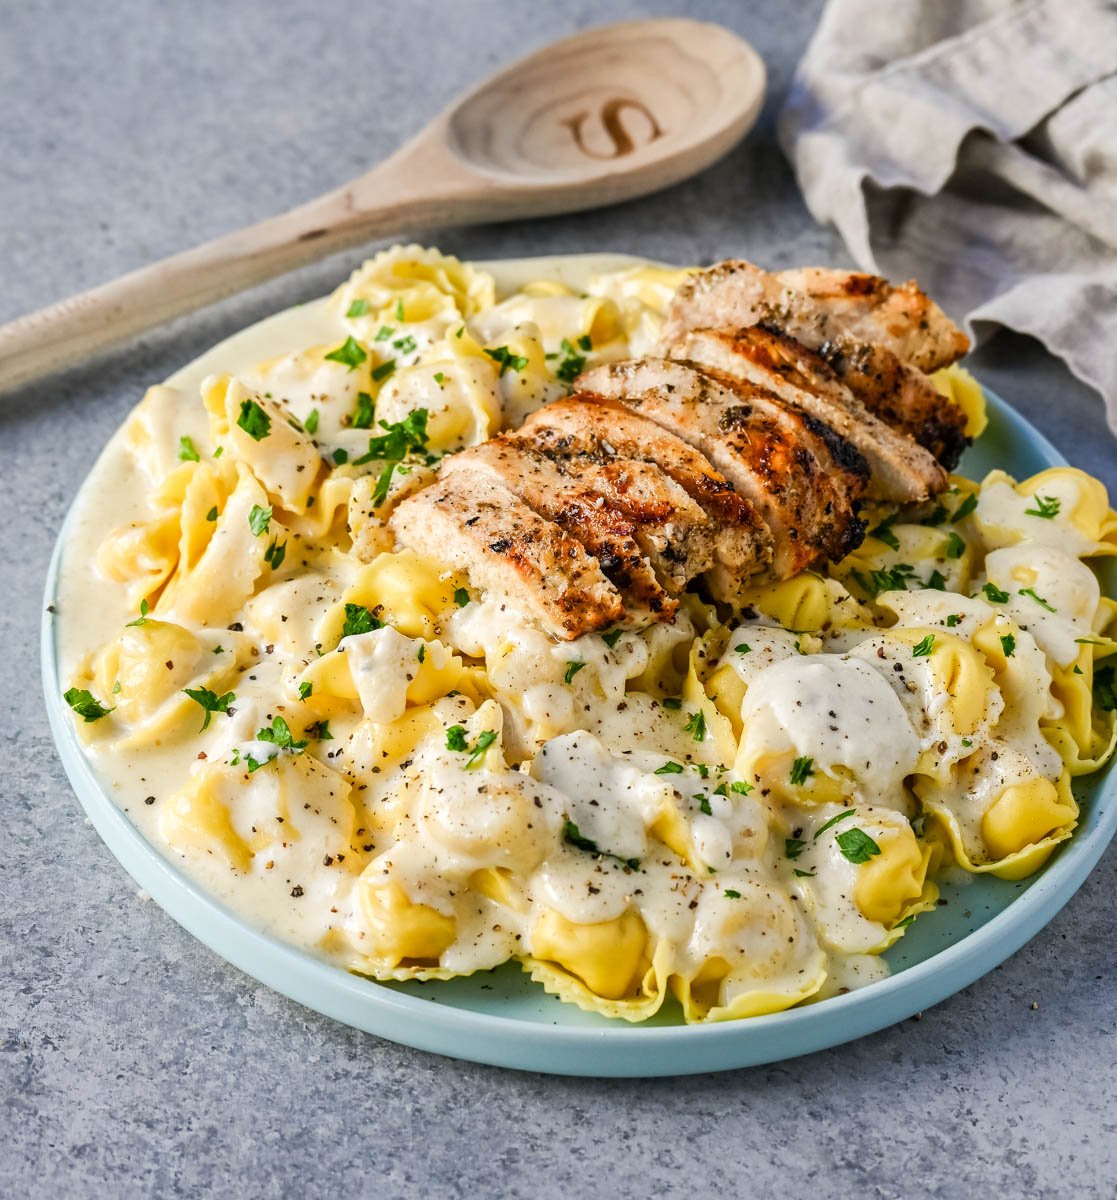 Tortellini Alfredo with Grilled Chicken is made with cheese tortellini tossed with parmesan cheese alfredo sauce and served with Italian grilled chicken. This Chicken Tortellini Alfredo Recipe is the ultimate comfort food.